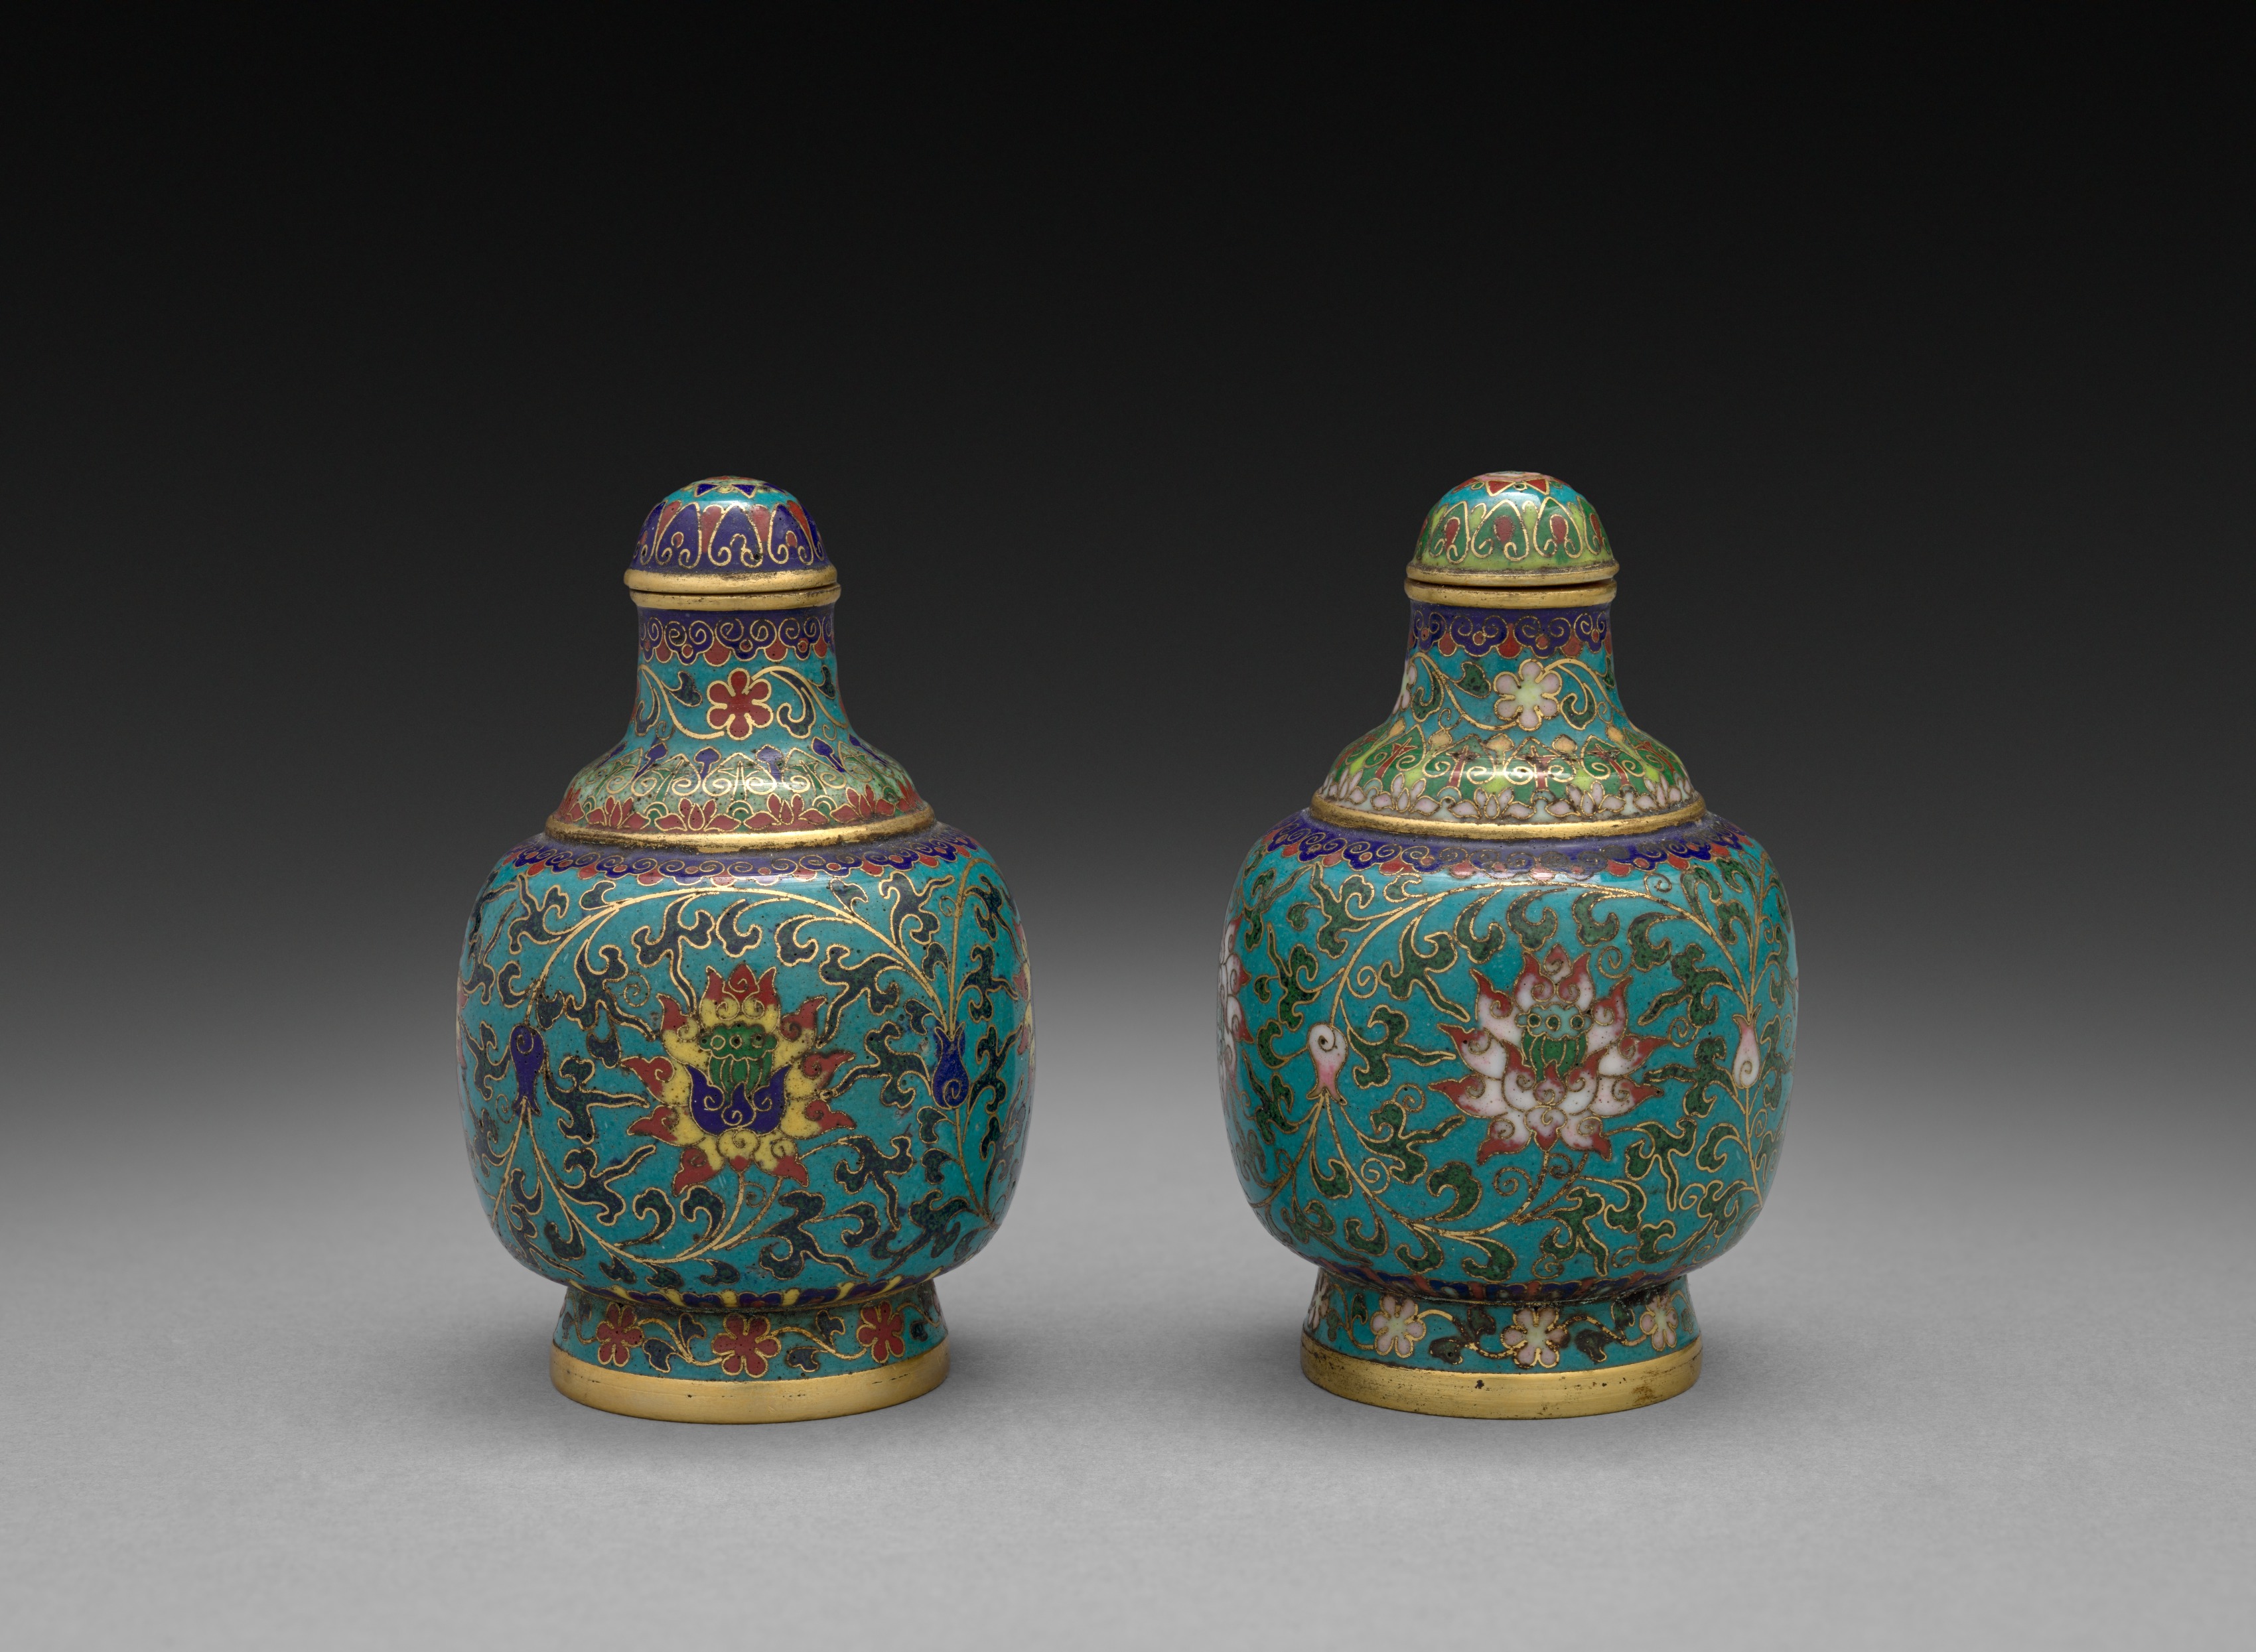 Pair of Snuff Bottles with Floral Scrolls